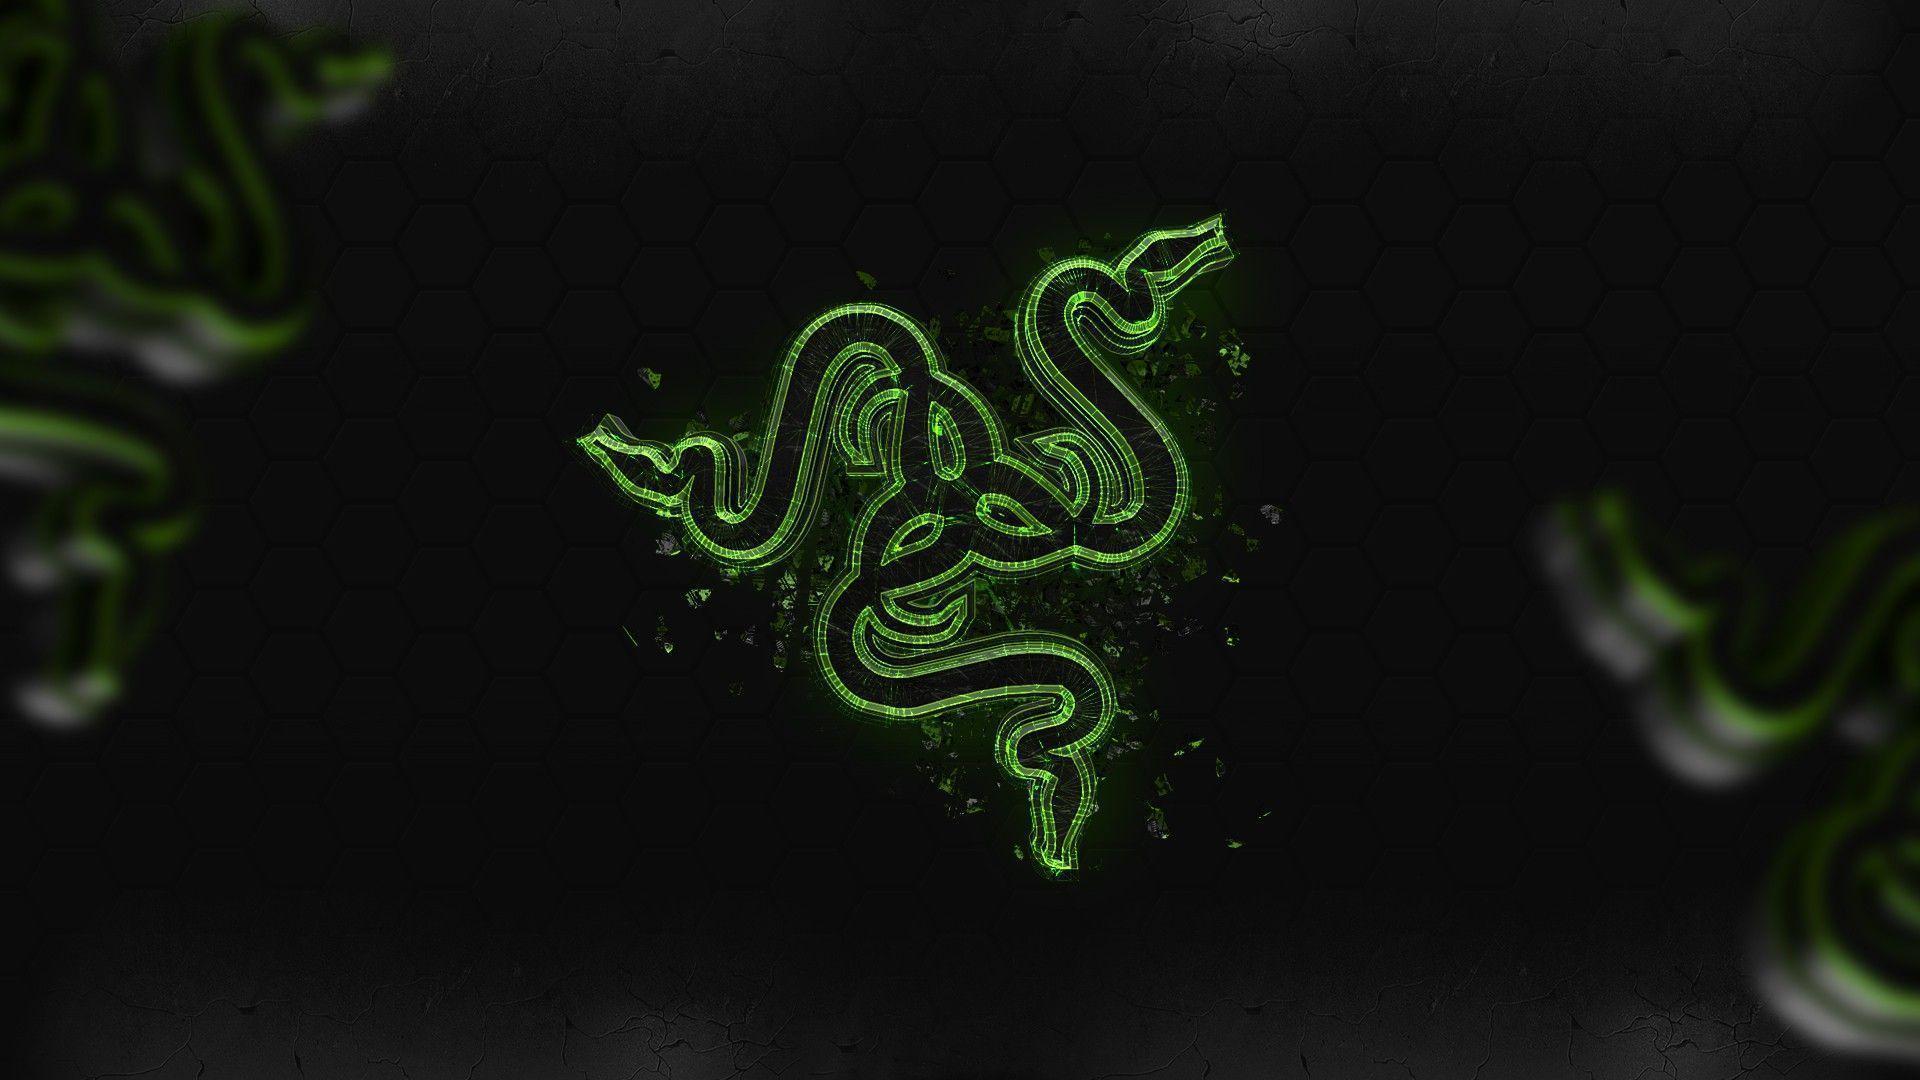 Wallpapers For > Razer Wallpapers Hd